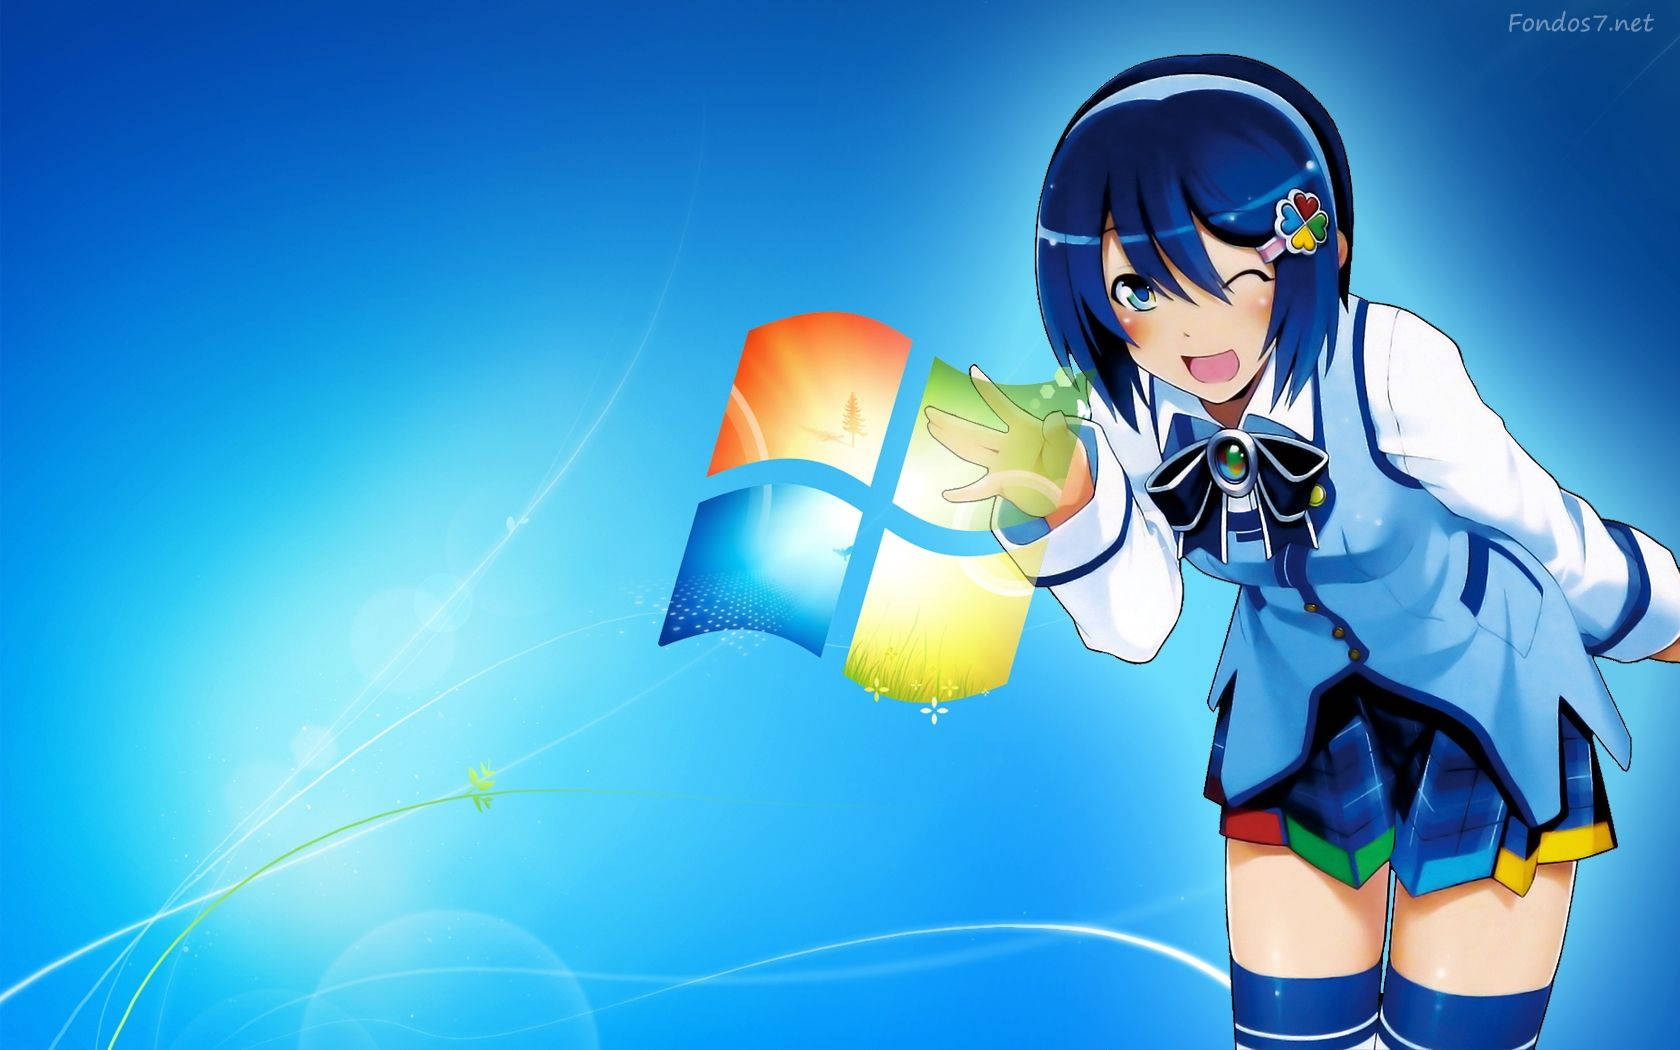 Cute anime wallpaper of a girl with blue short hair and uniform.